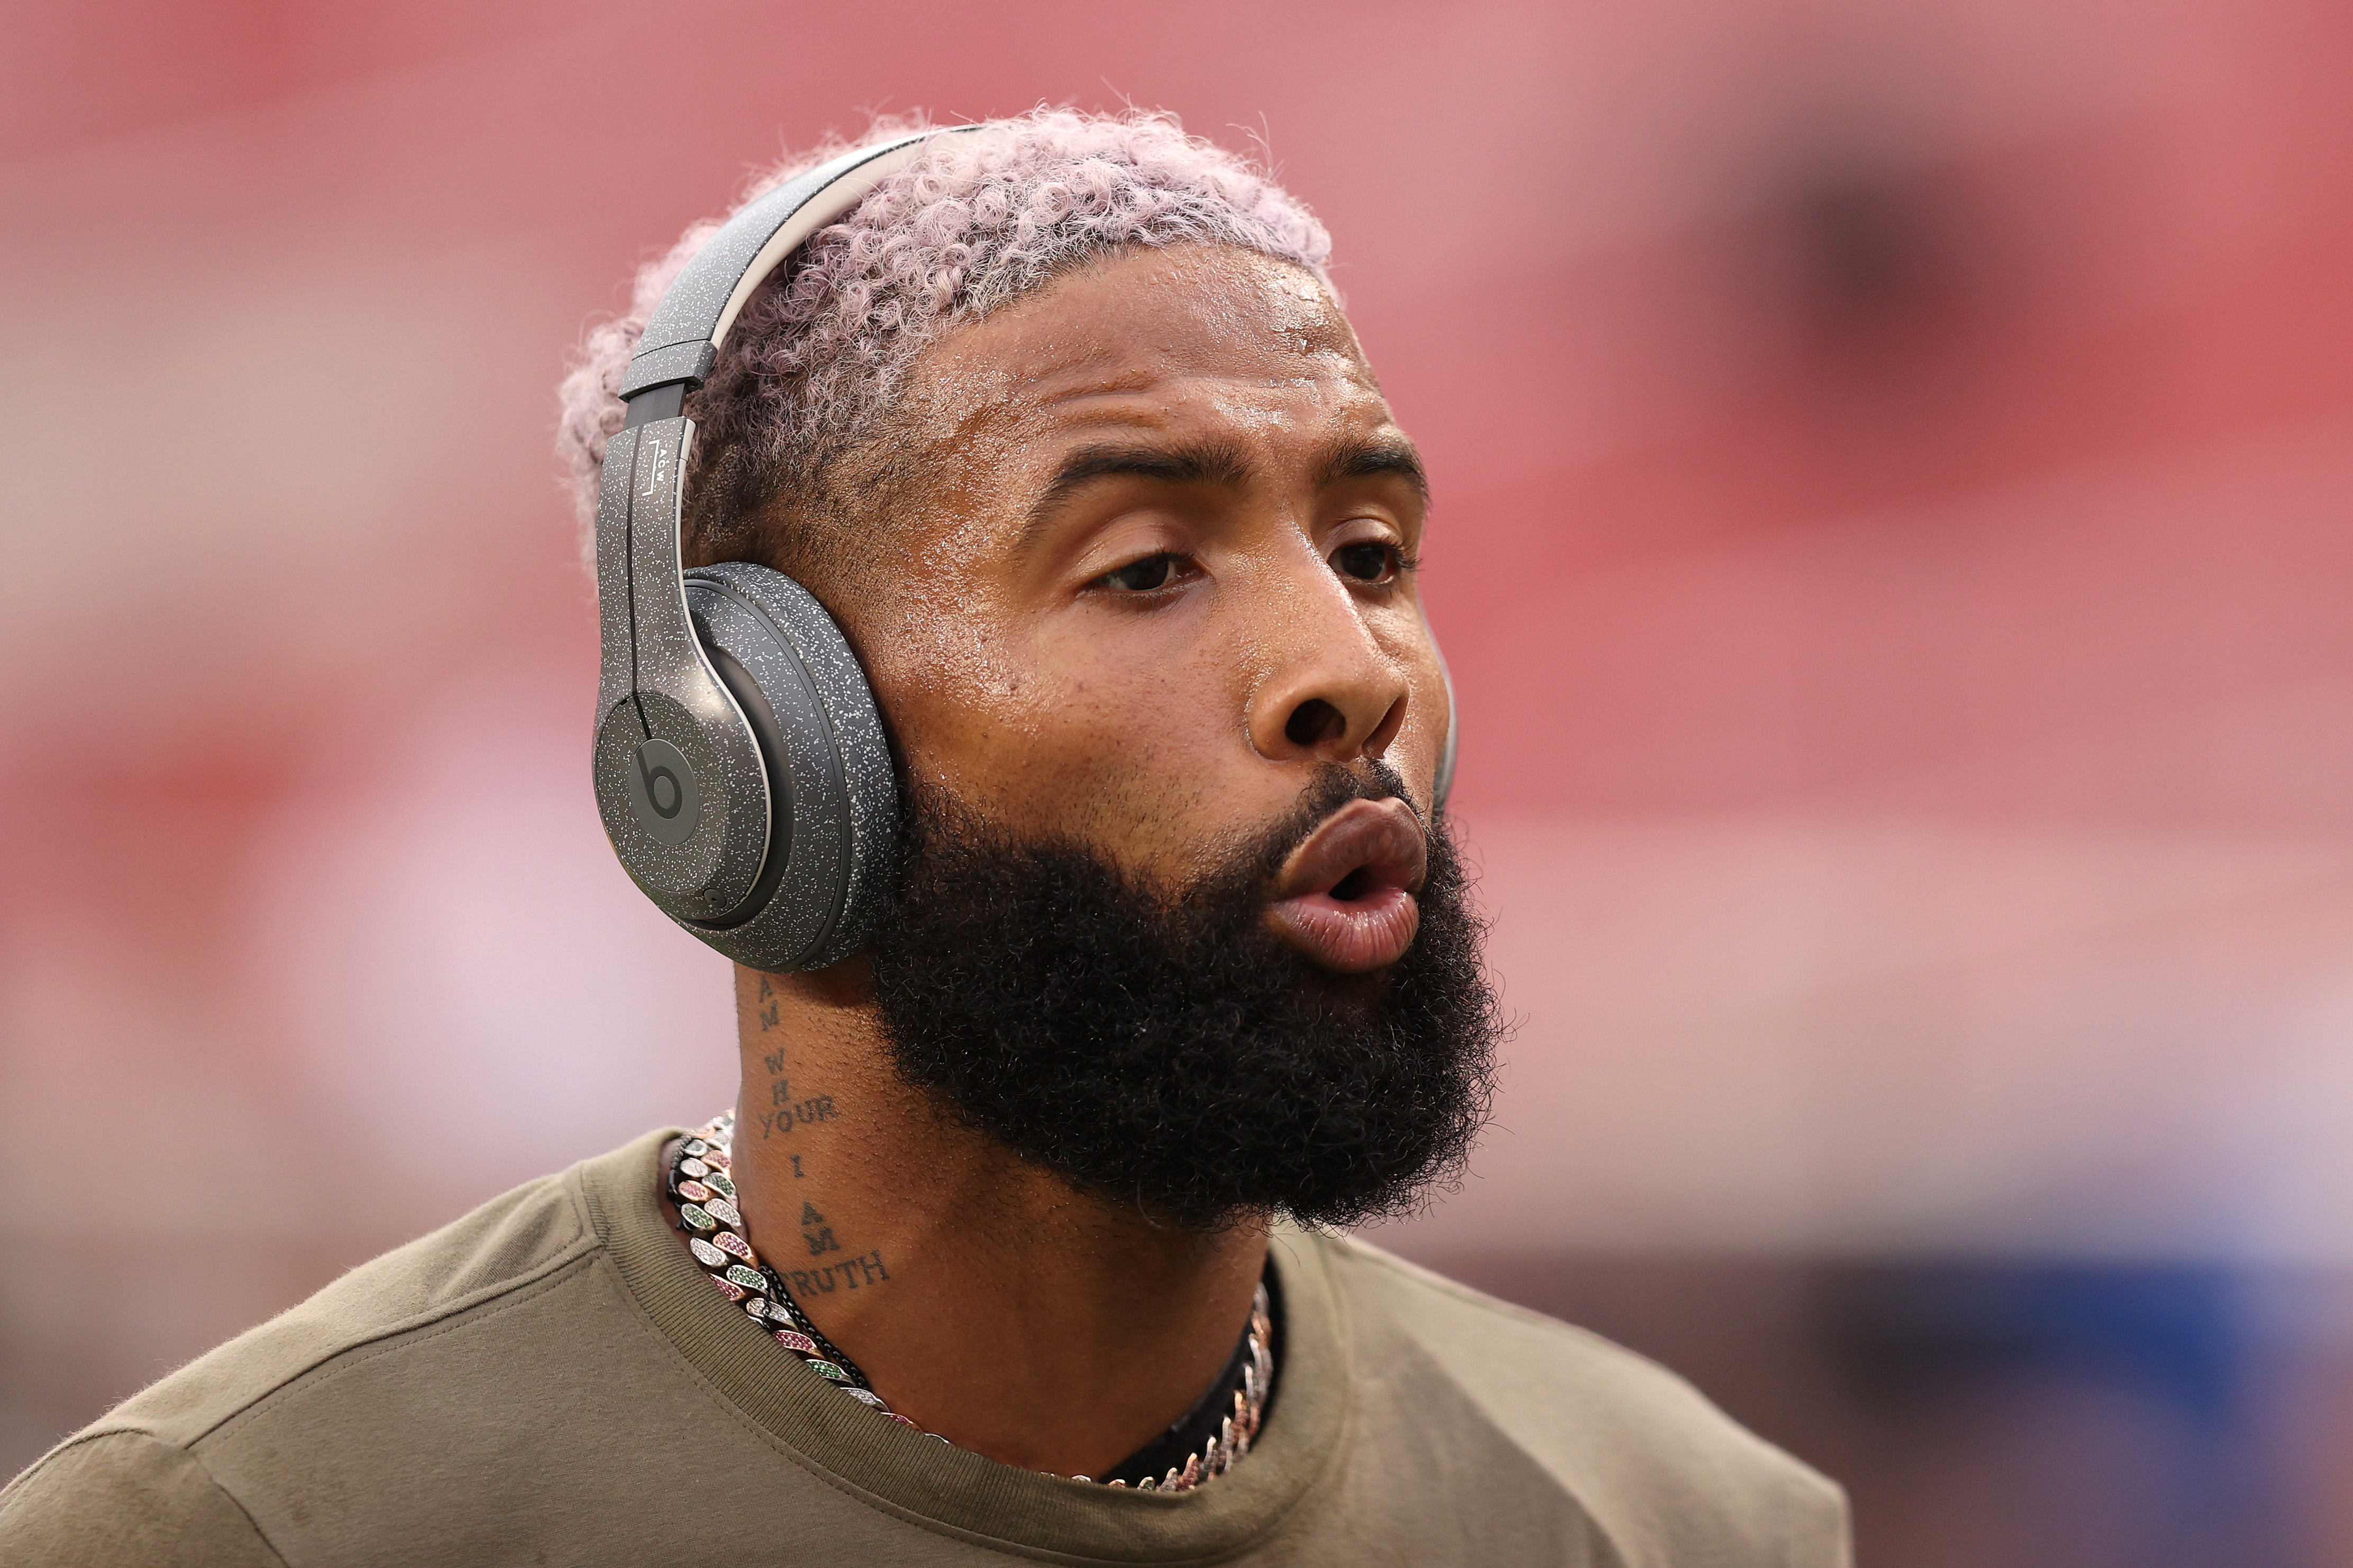 Rams player Odell Beckham Jr. will accept NFL salary in Bitcoin